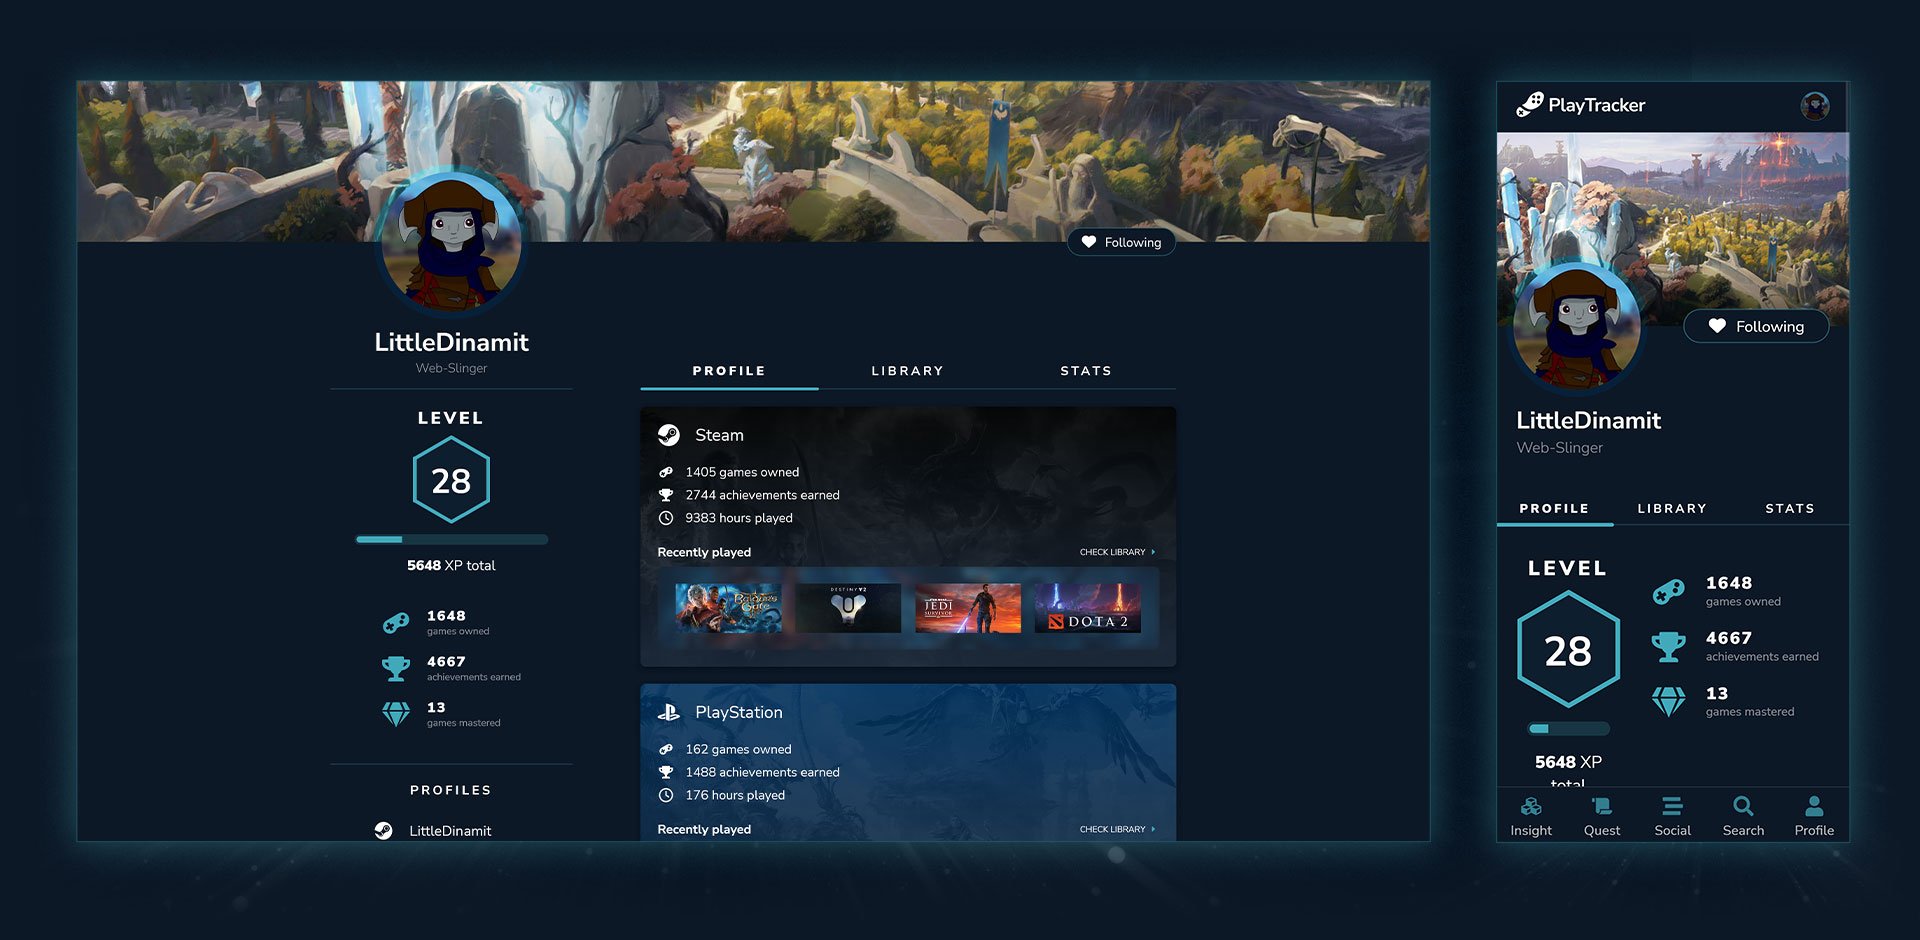 Screenshots of a user's PlayTracker profile page on desktop and mobile